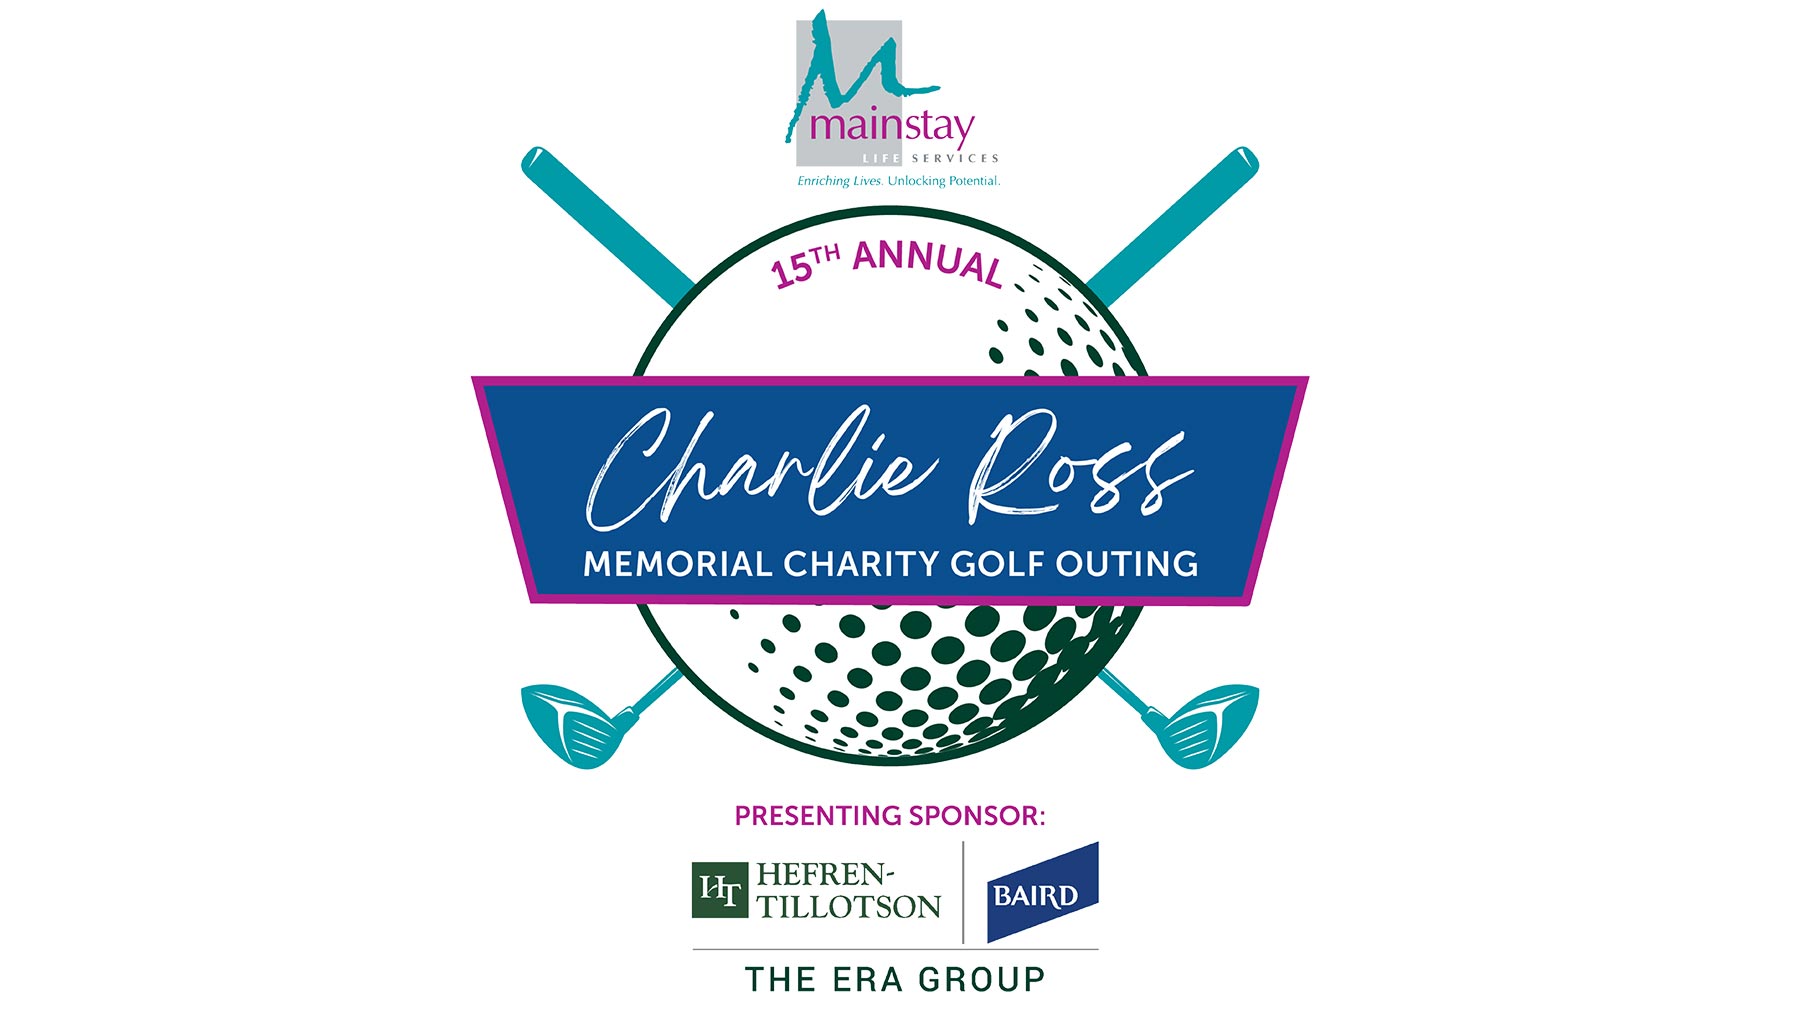 15th Annual Charlie Ross Memorial Charity Golf Outing Logo